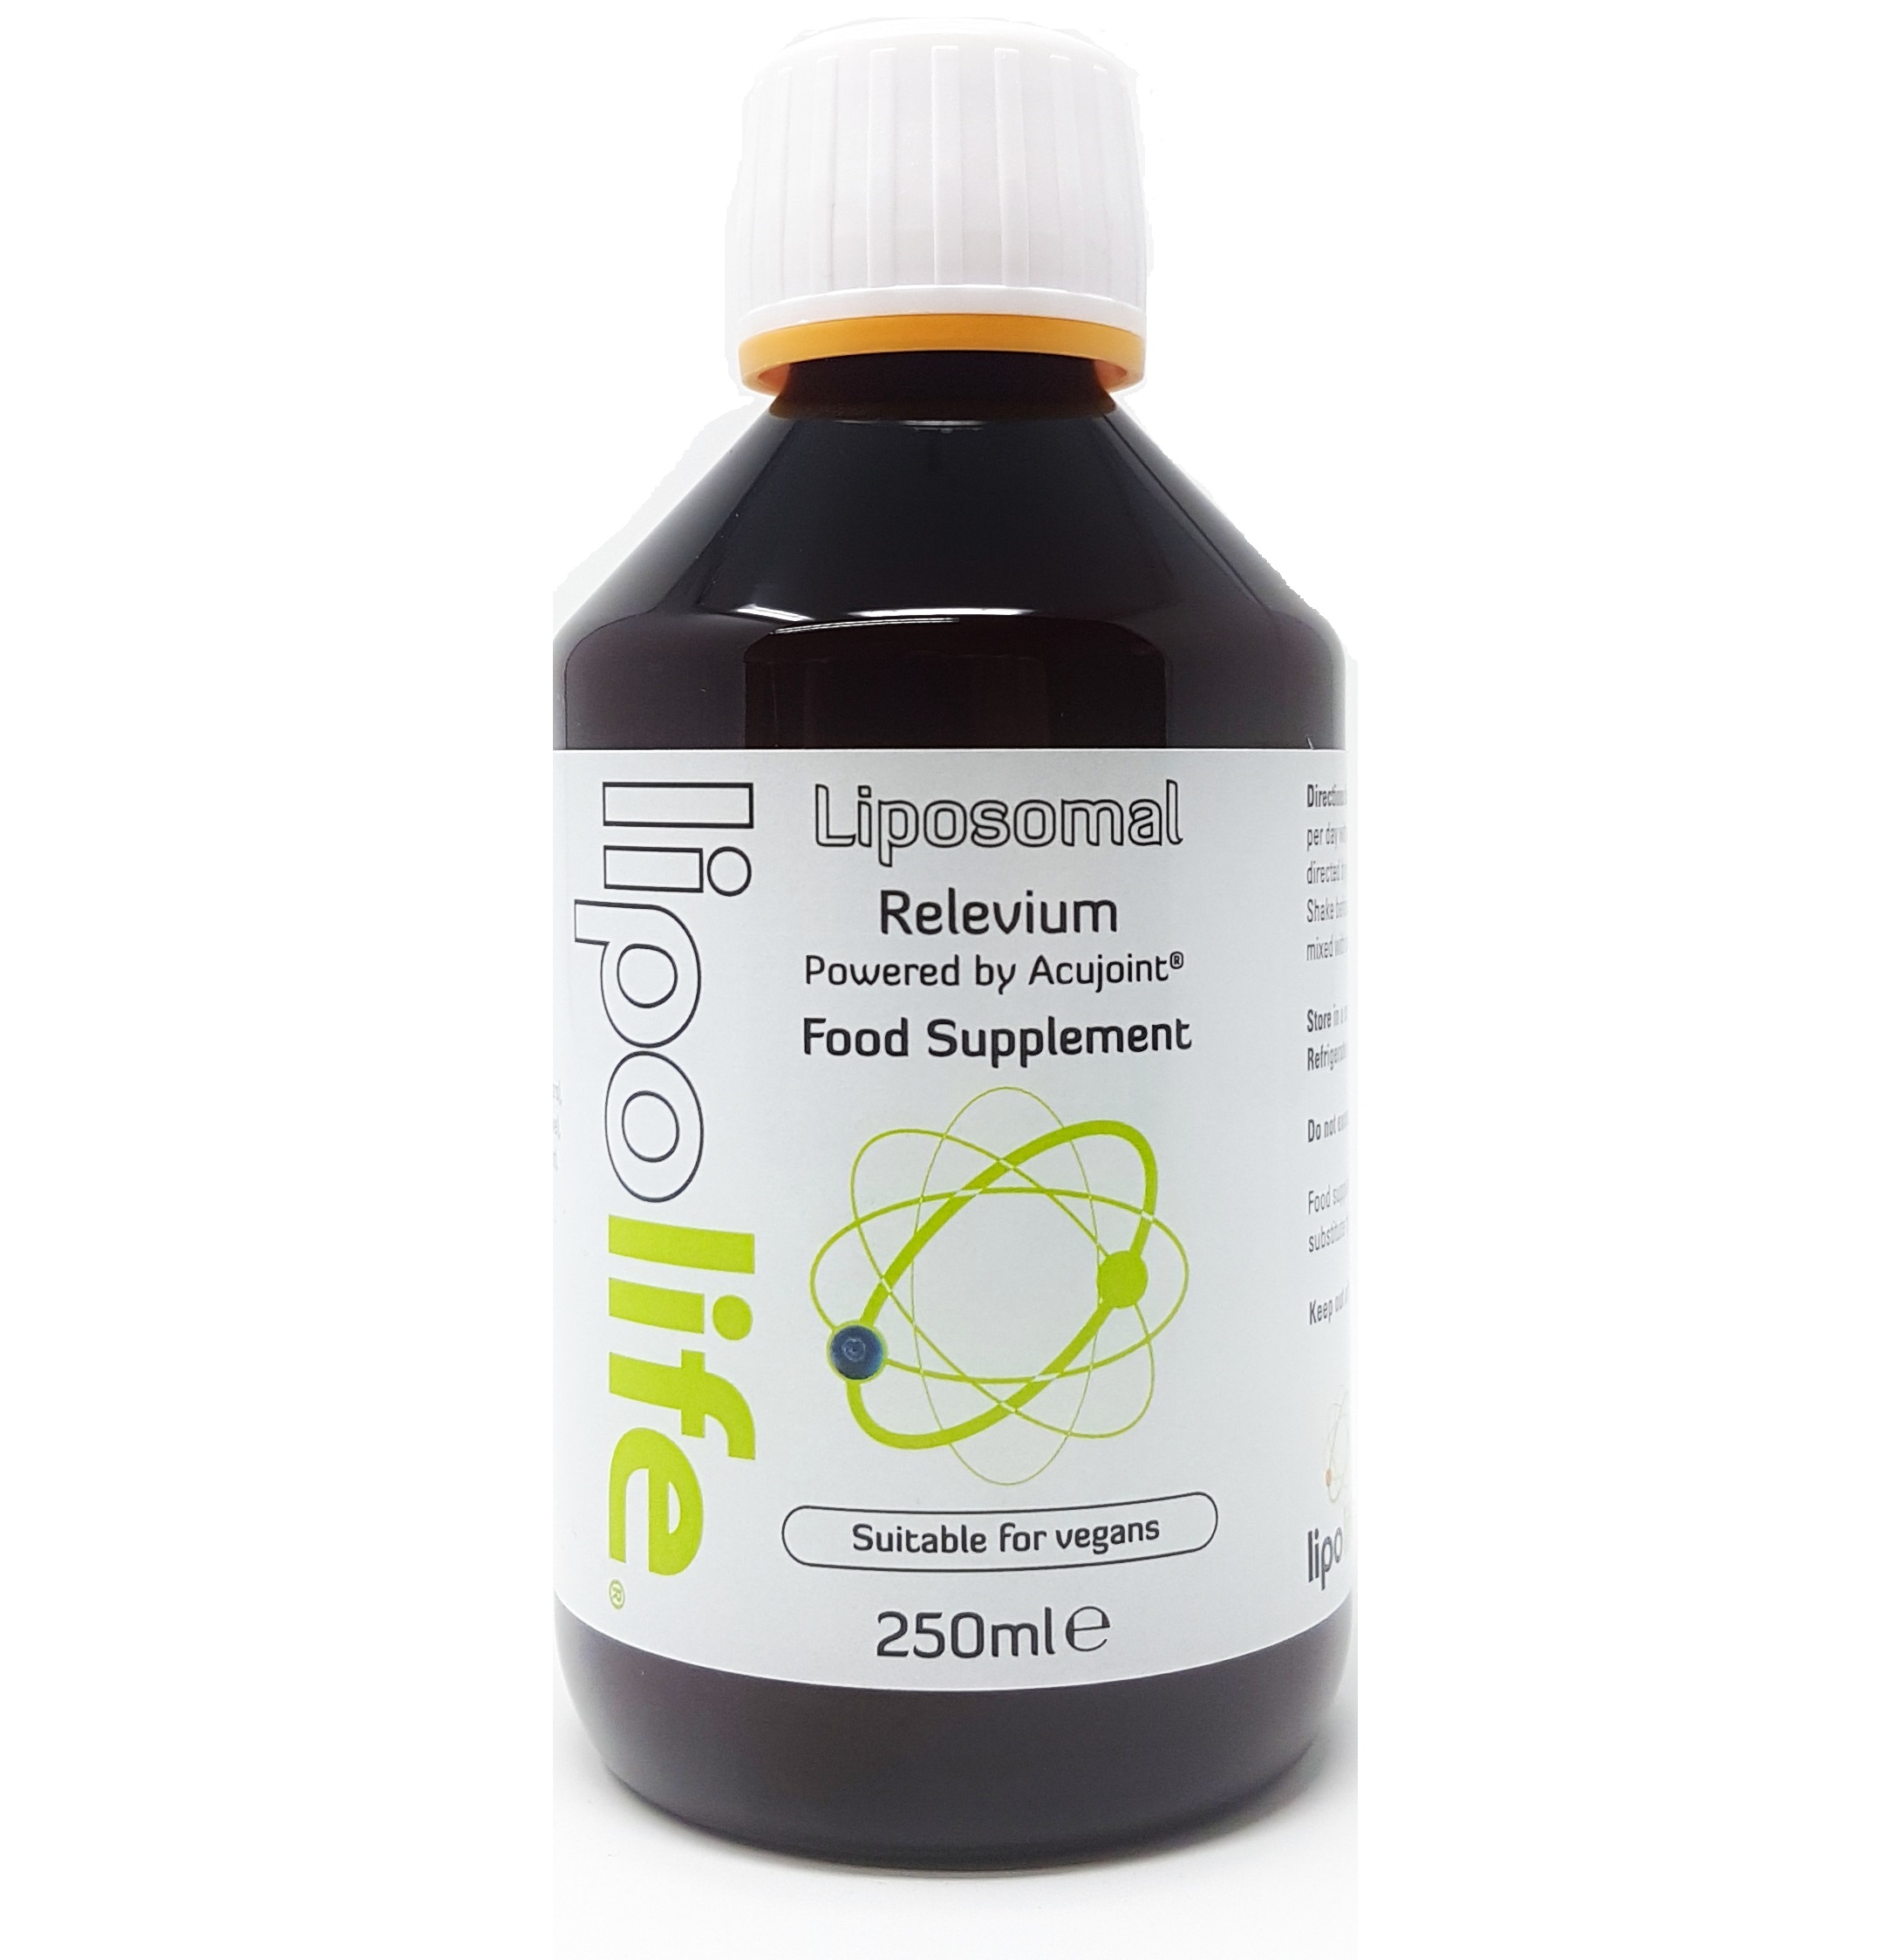 Liposomal Relevium 250ml (Currently Unavailable - Long Term Out of Stock)